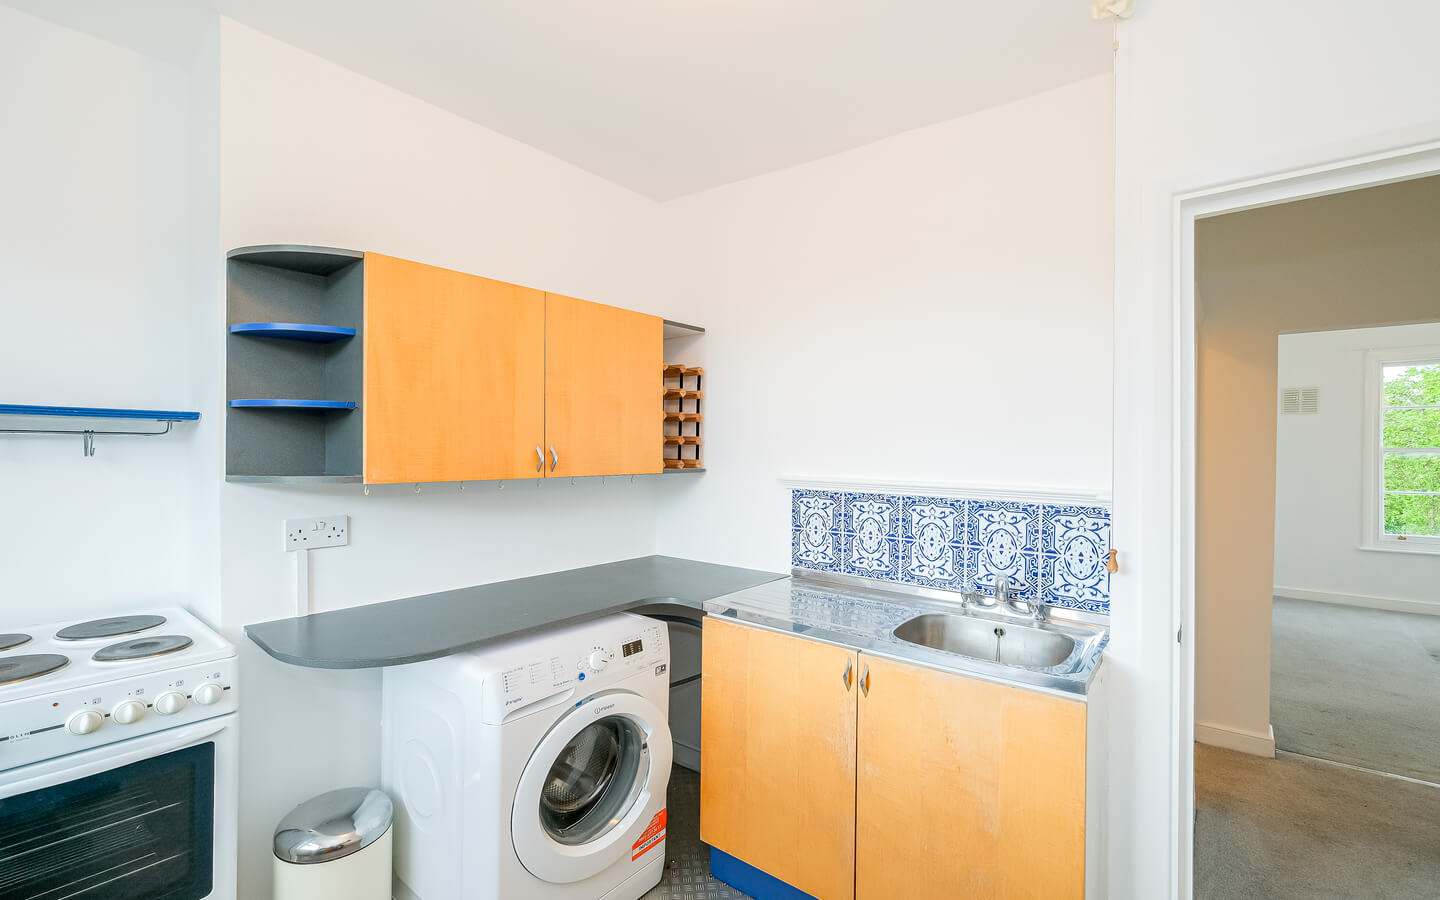 One Bedroom Flat For Rent - Hackney - London - E9 5HP